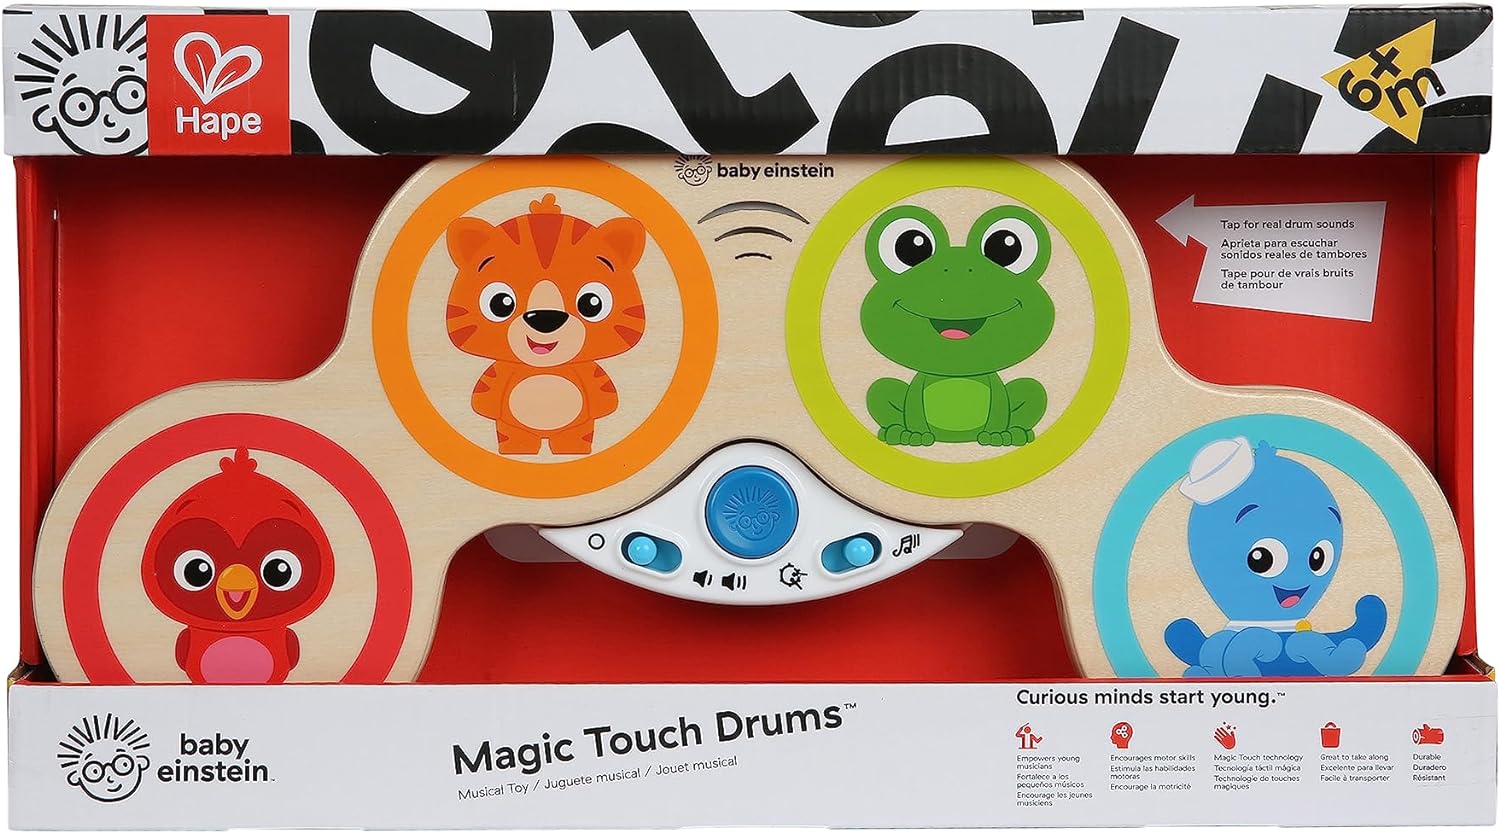 Baby Einstein Hape Magic Touch Drums - Demo Batteries Included 3 x AA